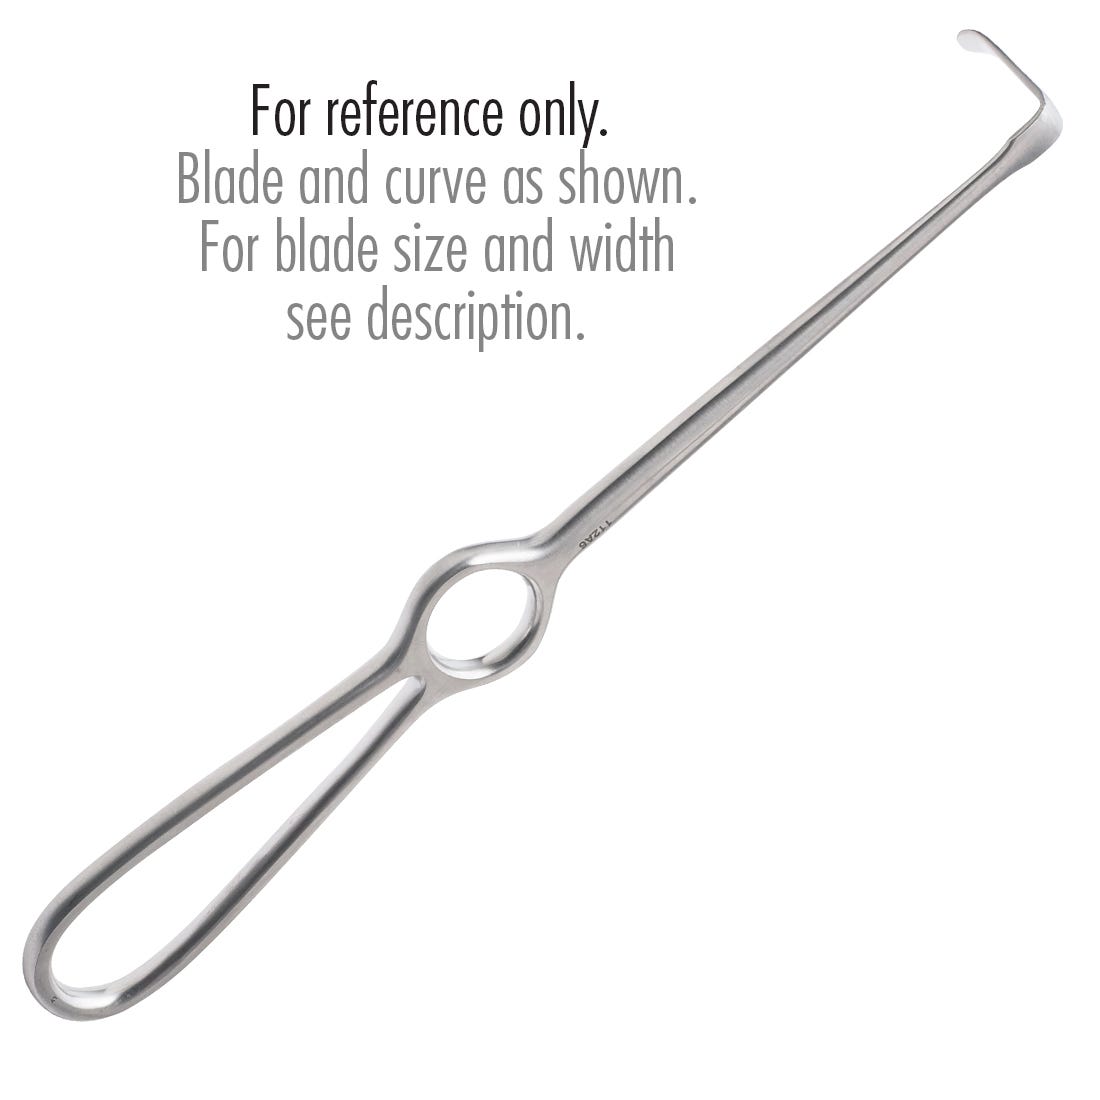 Obwegeser Type Surgical Retractor Standard, Curved Down, 12mm x 55mm